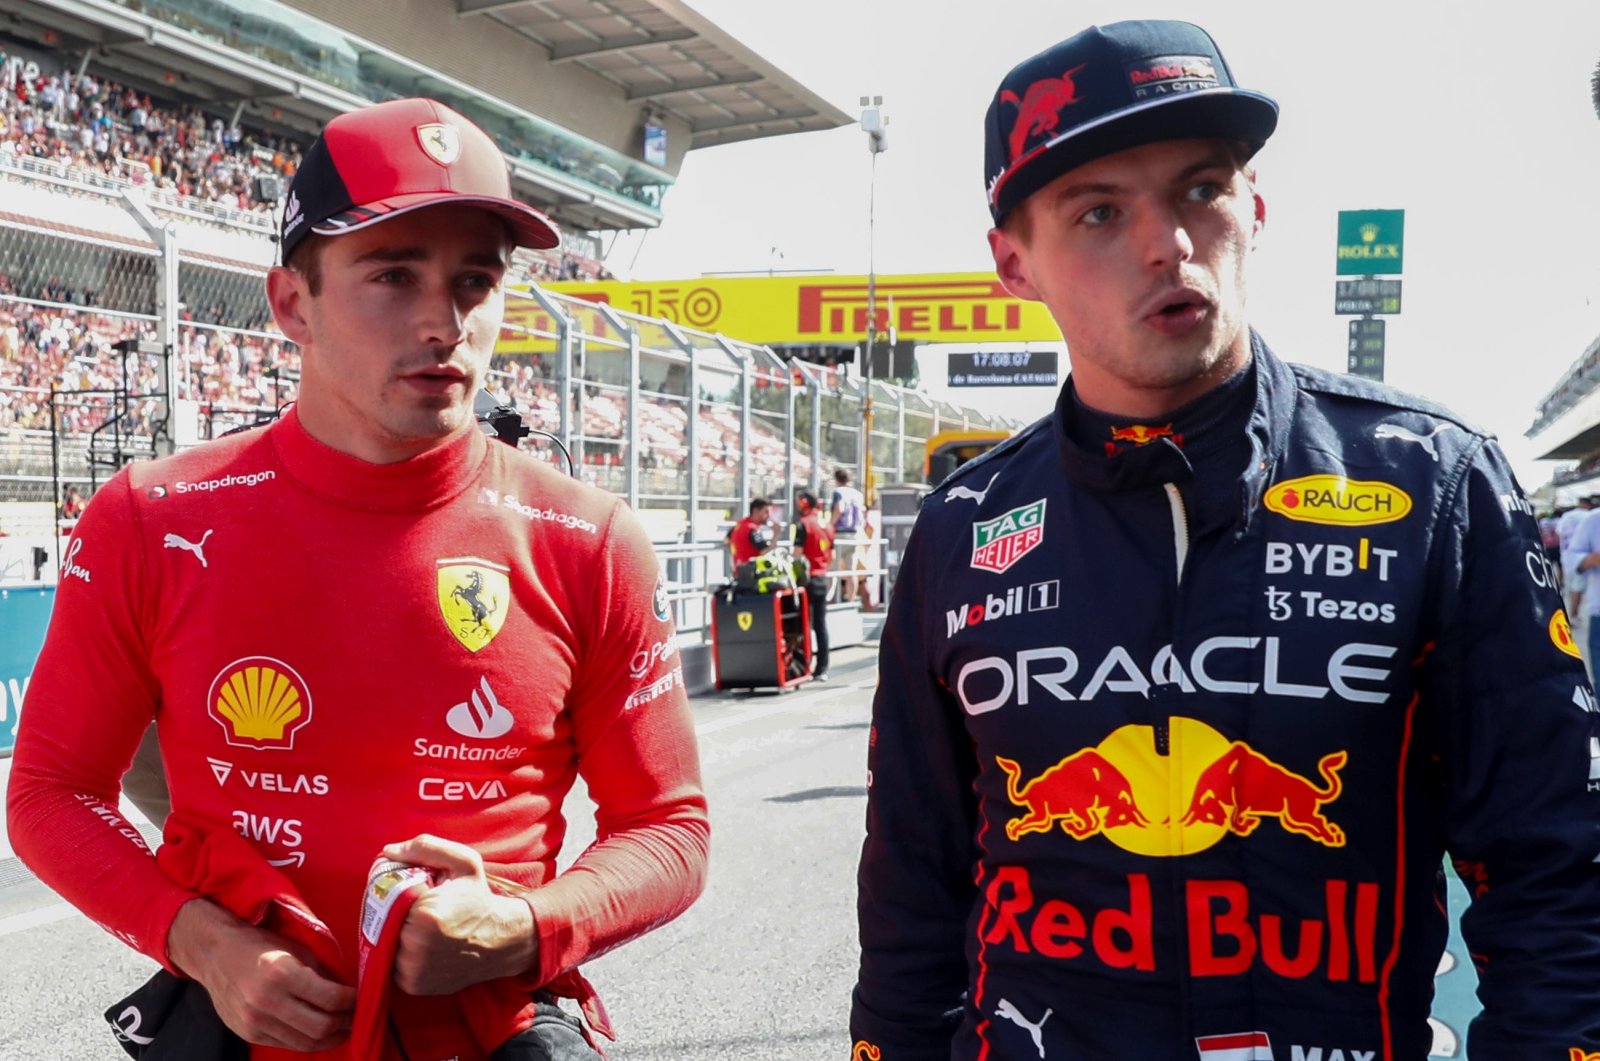 Ferrari&#039;s Charles Leclerc (L) is flanked by Red Bull&#039;s Max Verstappen at the Barcelona Grand Prix, Barcelona, Spain, May 21, 2022. (AP Photo)